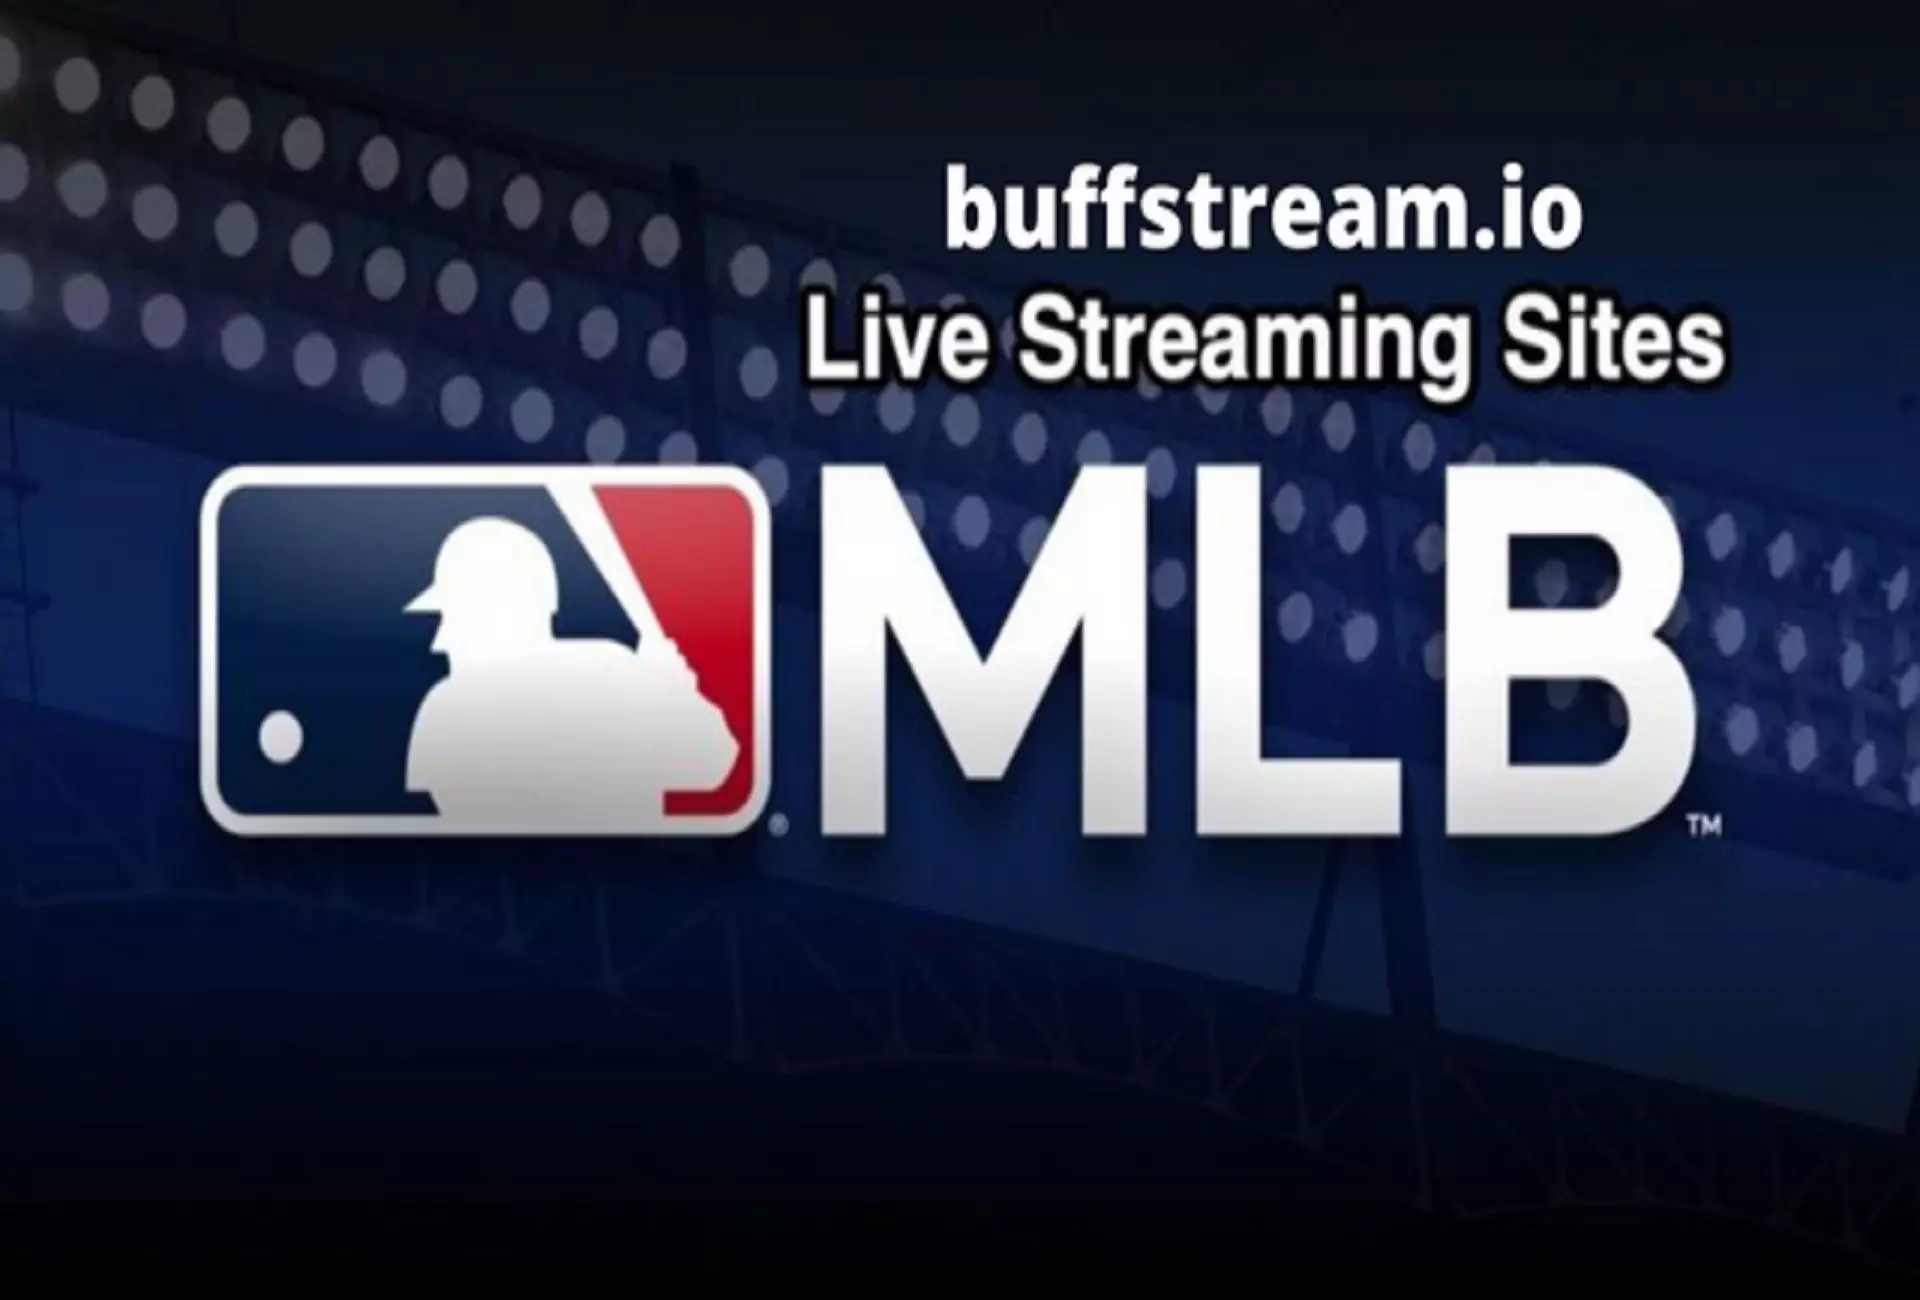 Find the best MLB streams with buffstream.io in 2022